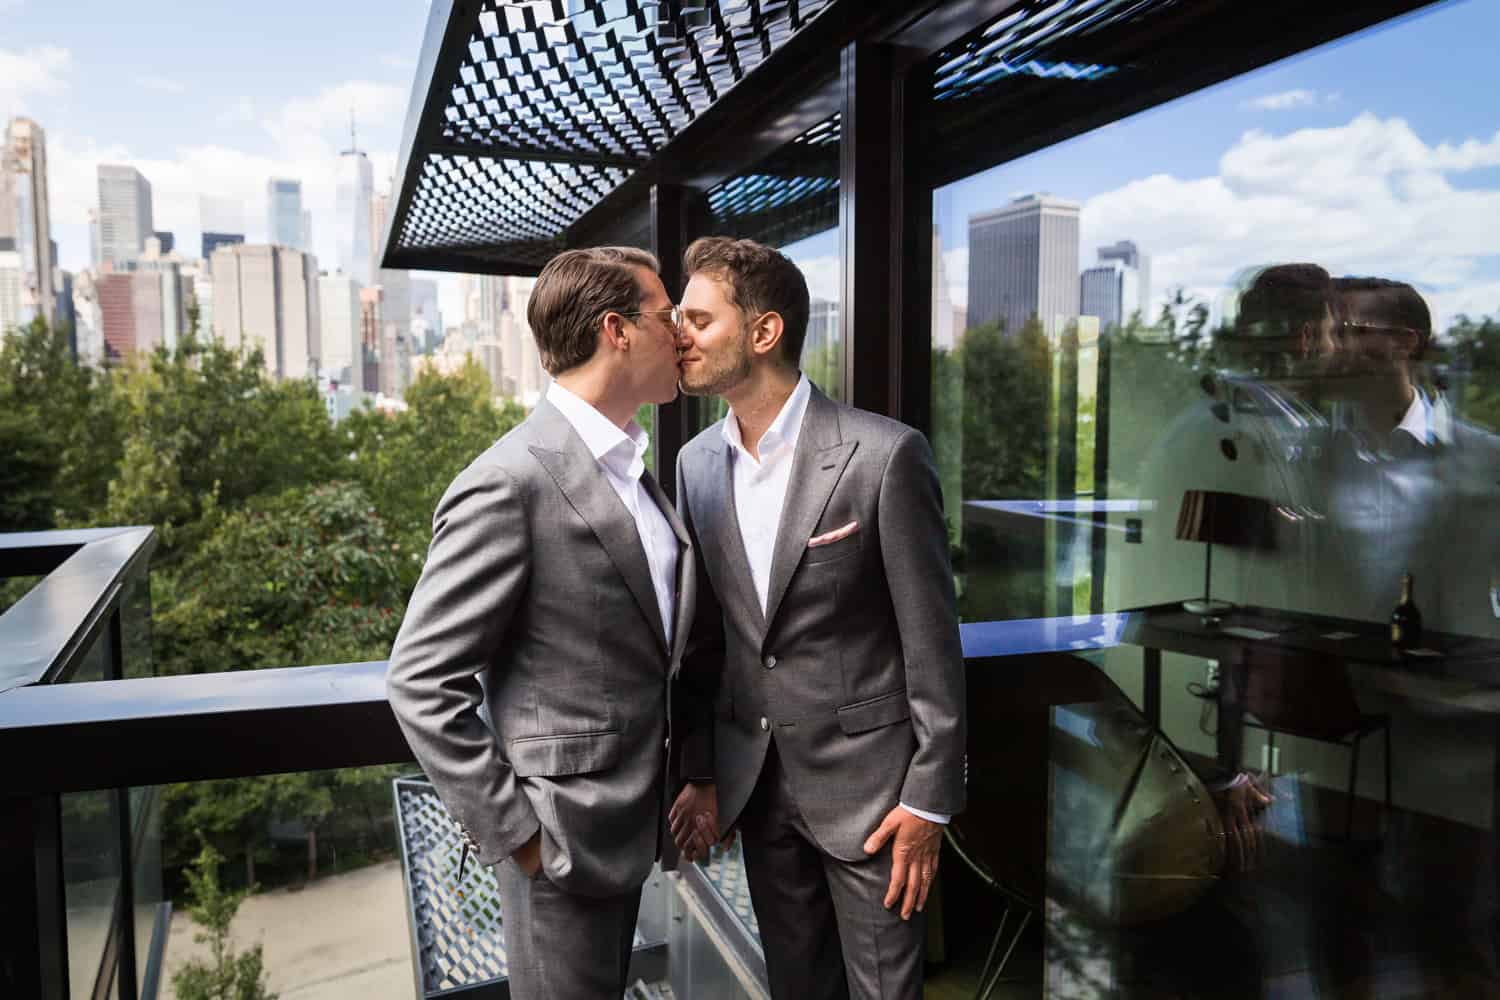 Greenpoint Loft wedding photos of two grooms kissing on hotel terrace